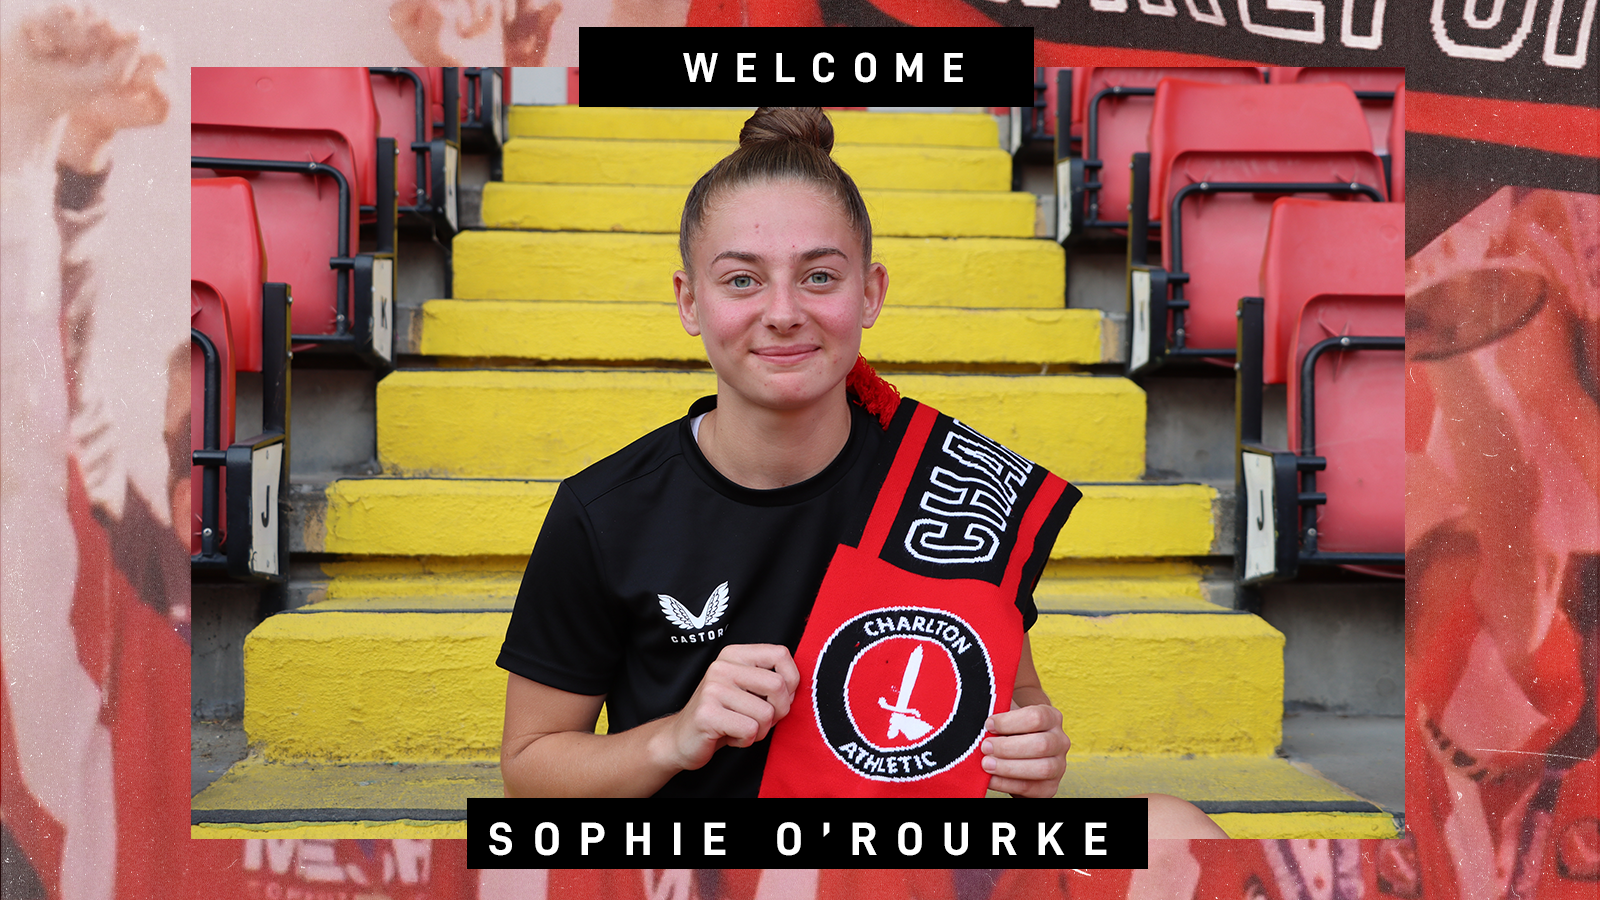 Sophie O'Rourke welcome graphic 